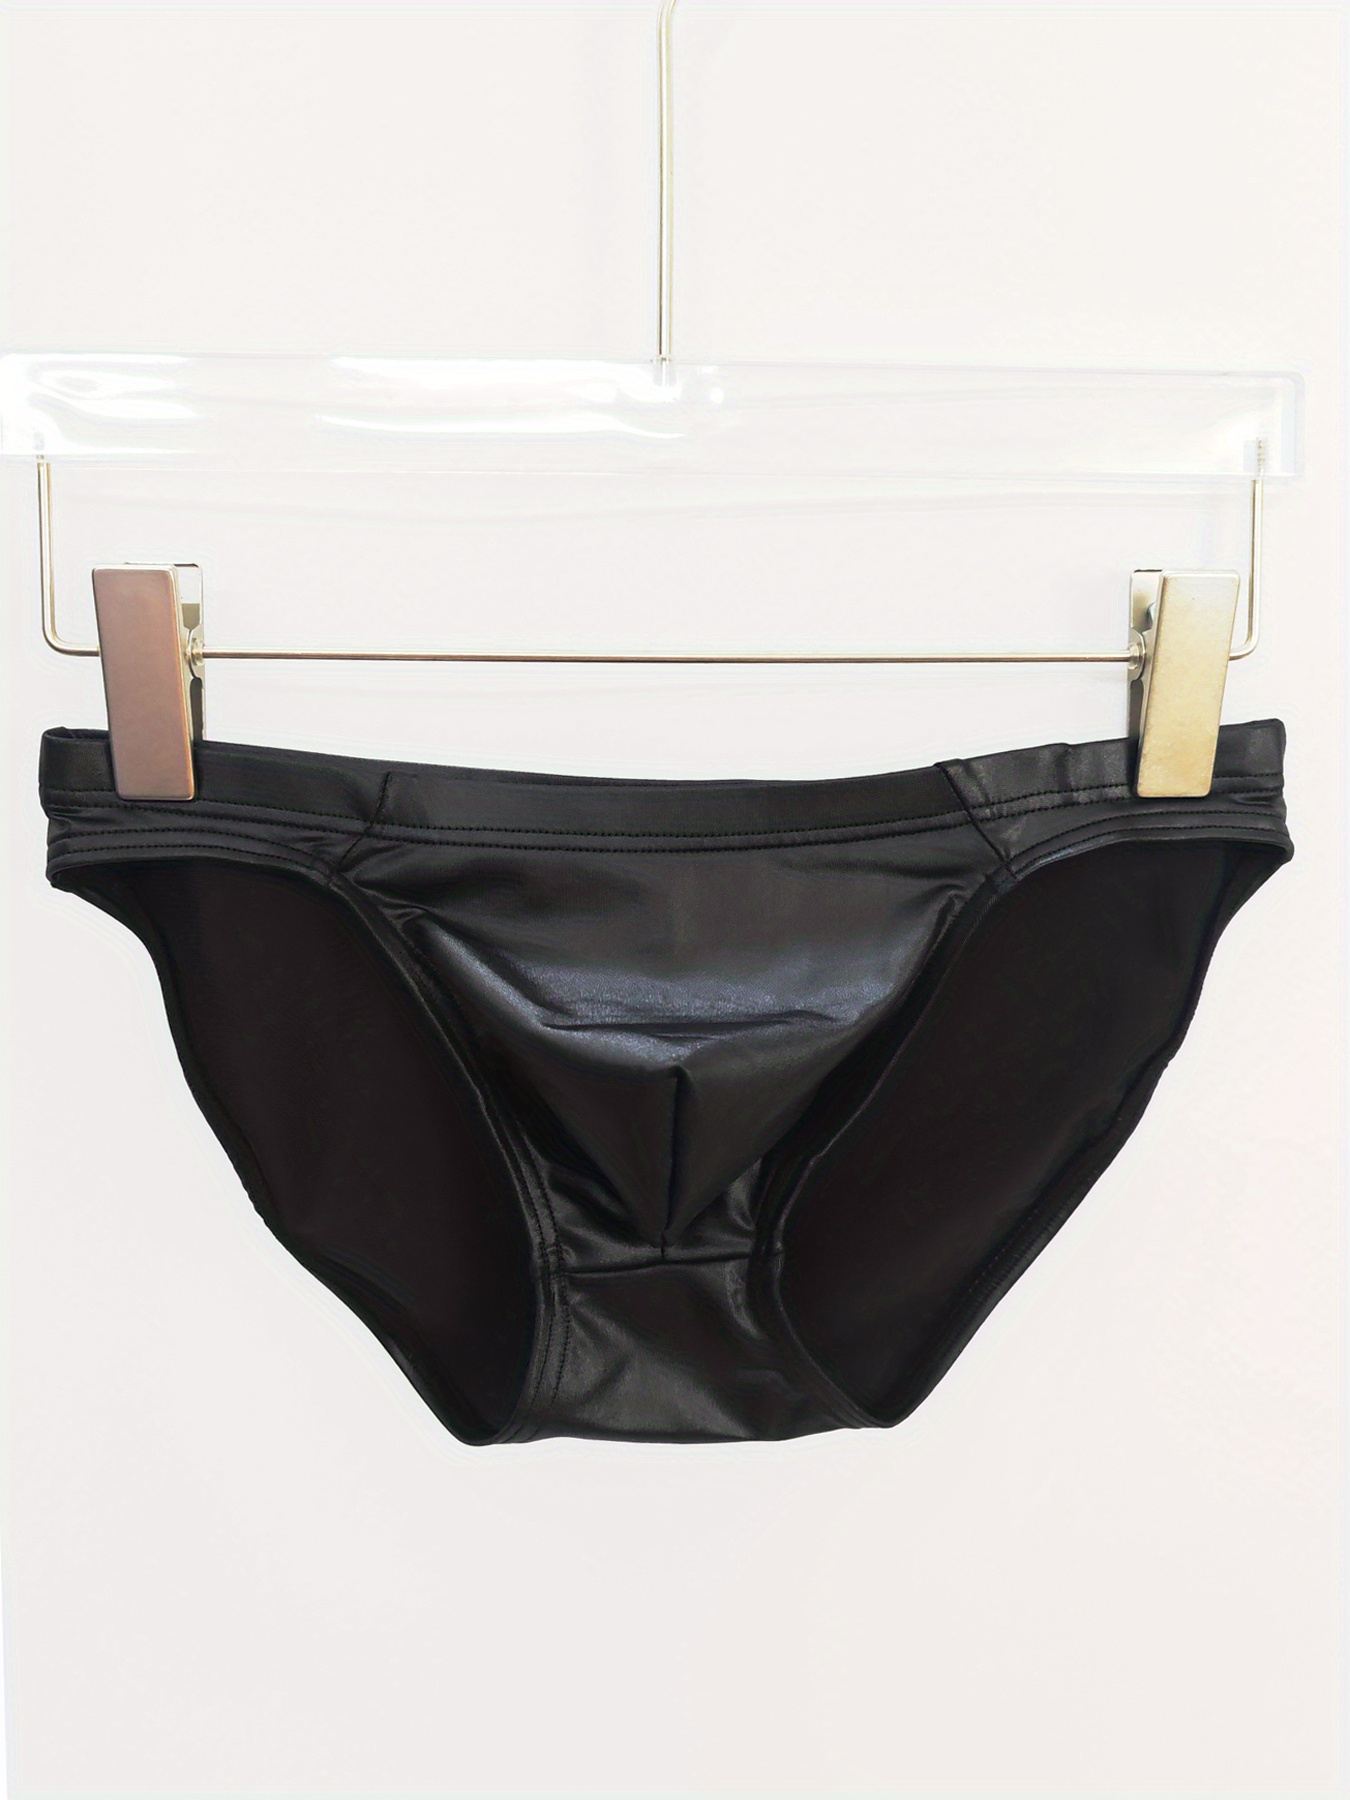 Sexy Shiny Faux Leather Low Waist Satin Panties For Women For Plus